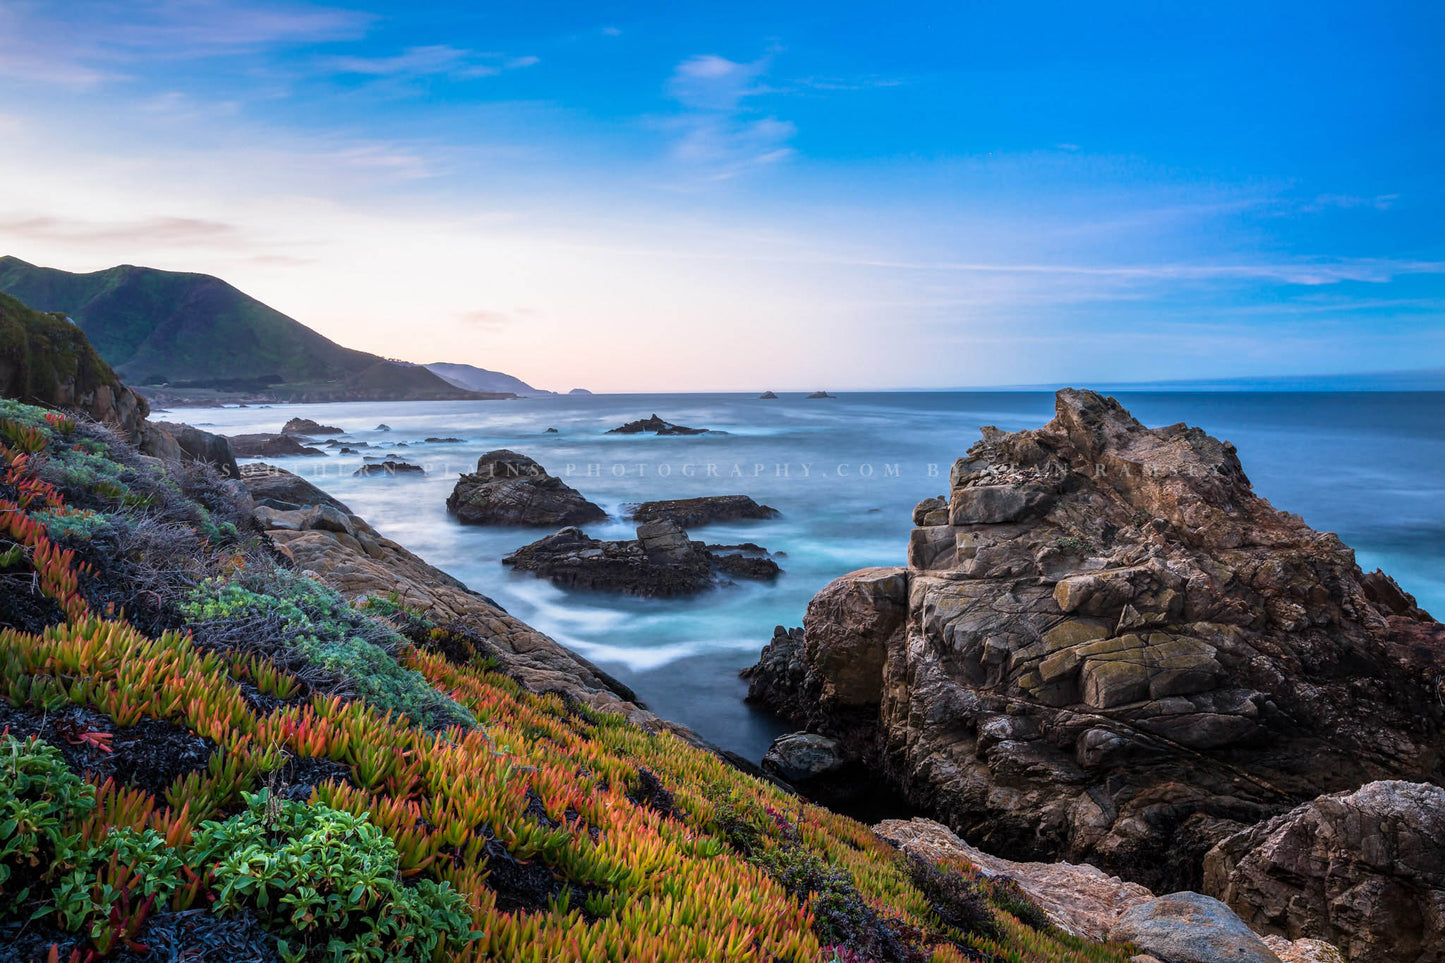 Coastal photography print of colorful succulents lining the shore at sunrise along the Pacific Ocean at Big Sur, California by Sean Ramsey of Southern Plains Photography.